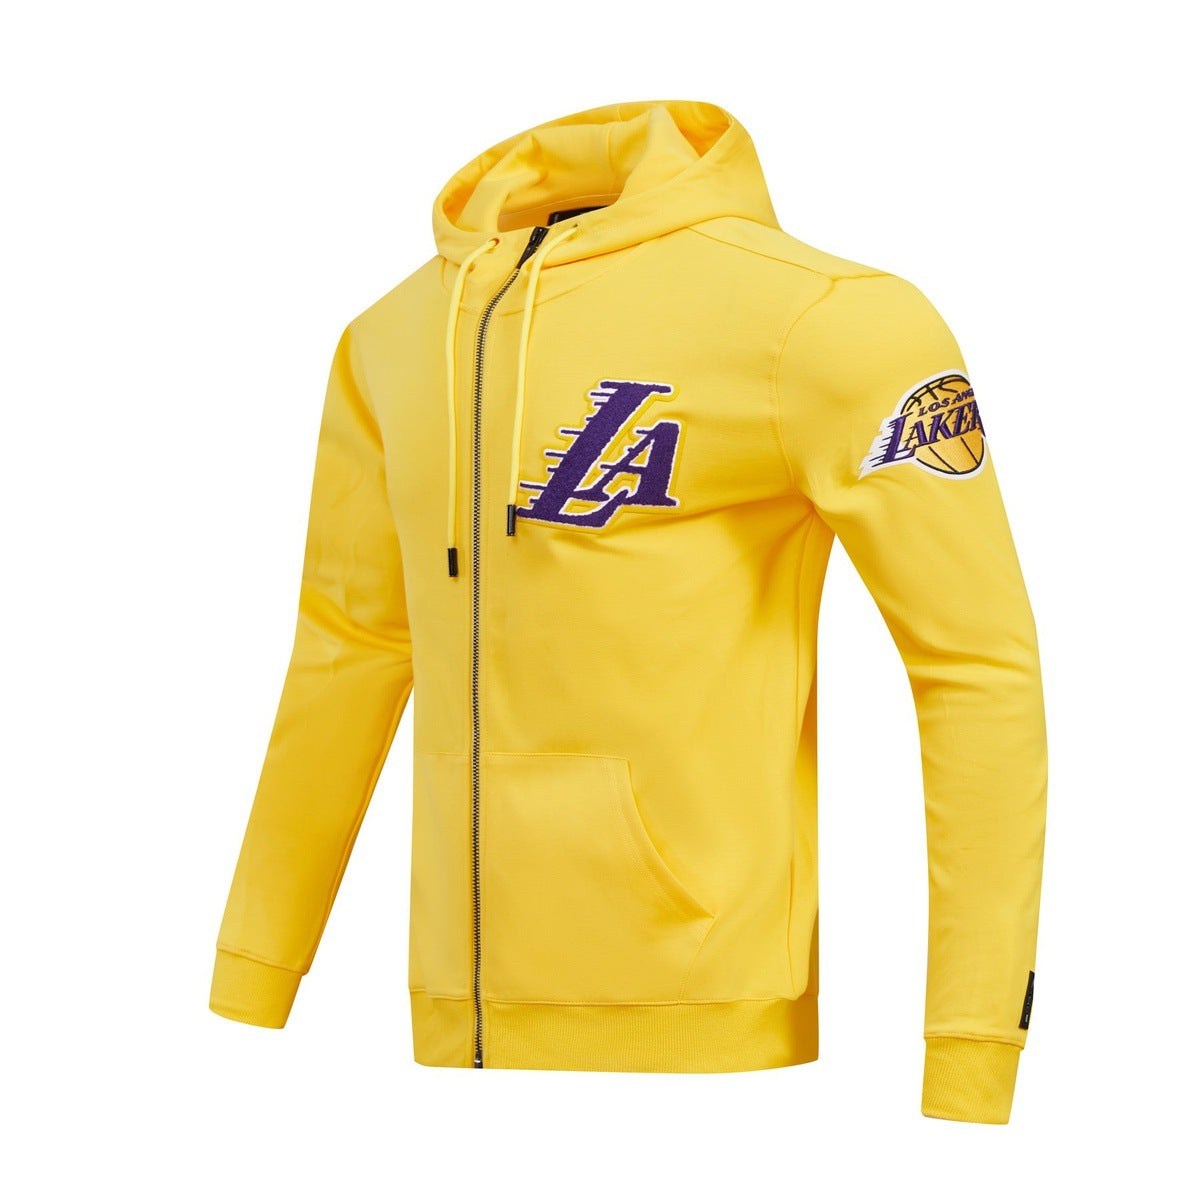 Los Angeles Lakers Pro Standard Camo Team Pullover Hoodie M